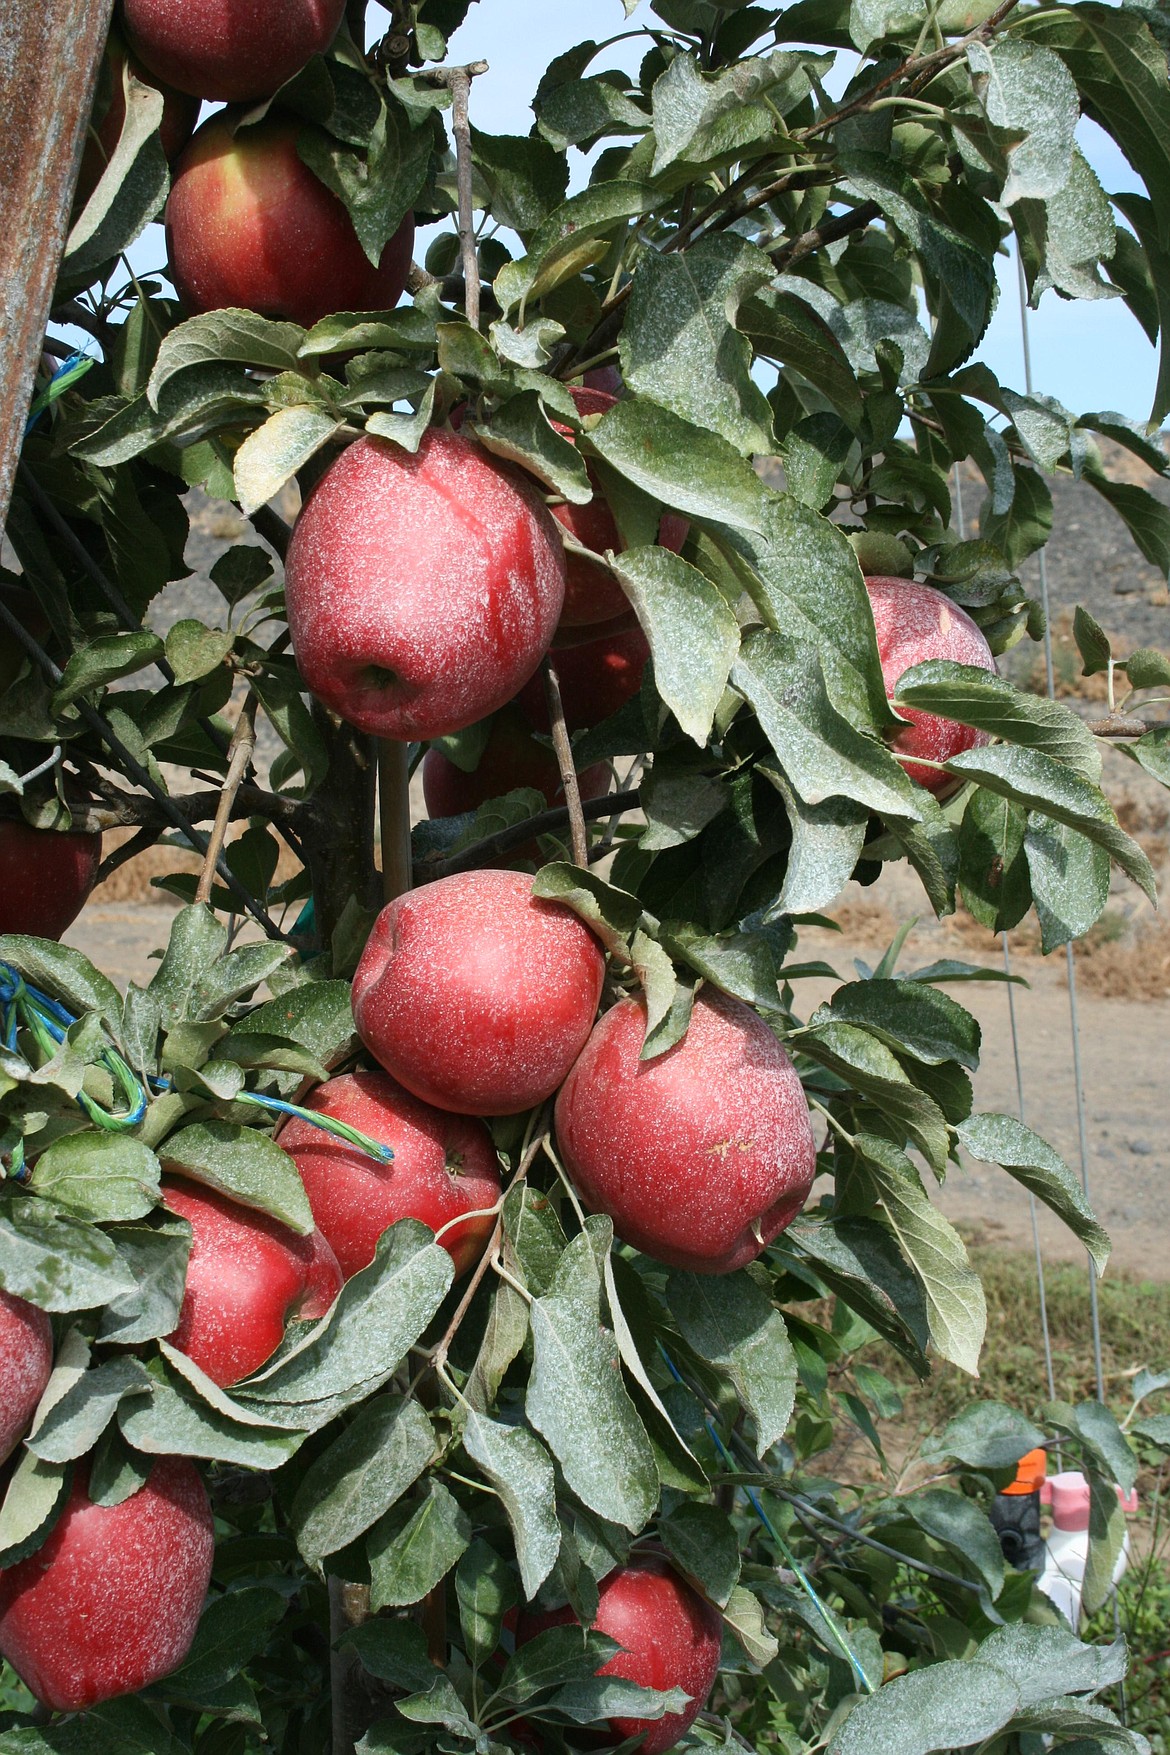 Retaliatory tariffs and congestion at U.S. ports have scrambled the export market for Washington fruit growers, including apple growers. Pictured, apples ready for harvest in a Royal City-area orchard.